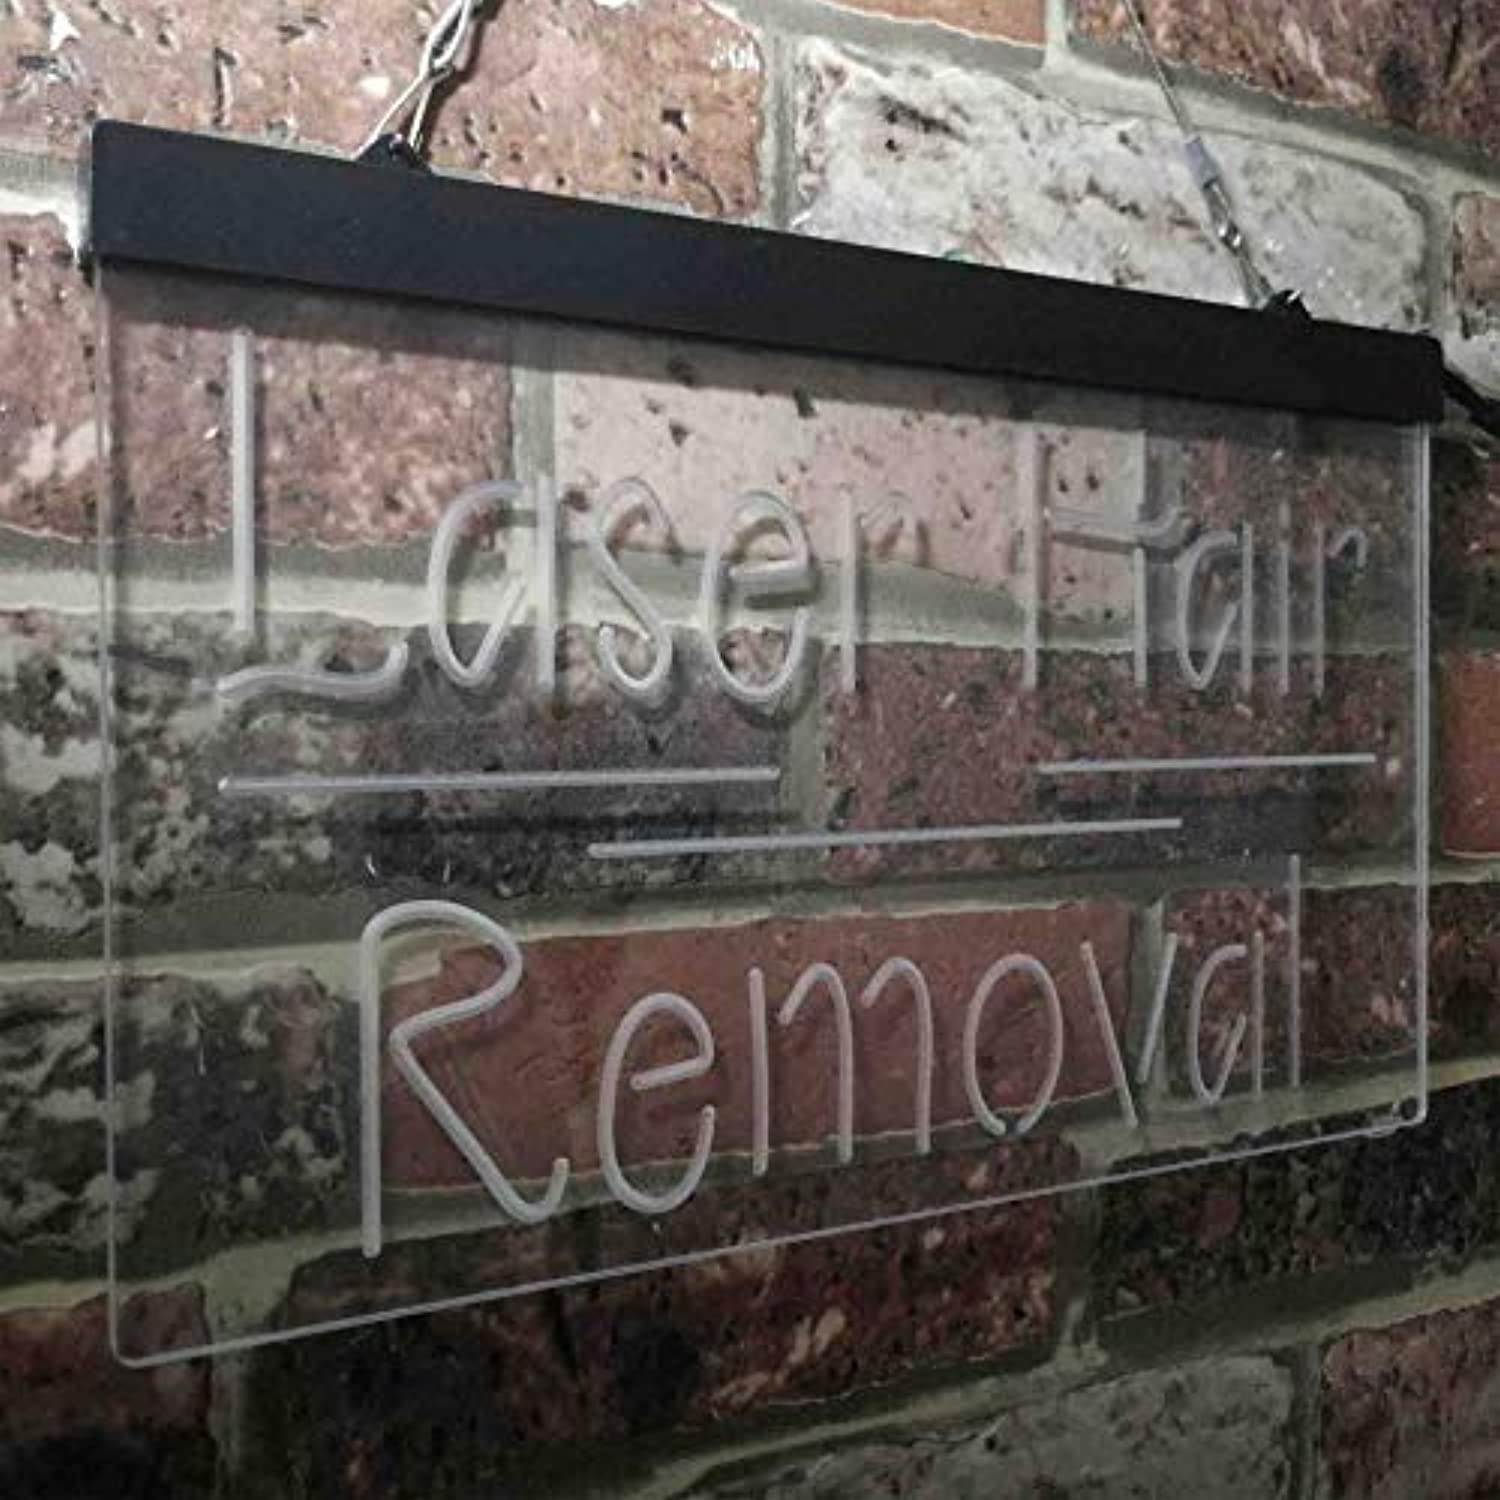 Laser Hair Removal LED Neon Light Sign - Way Up Gifts